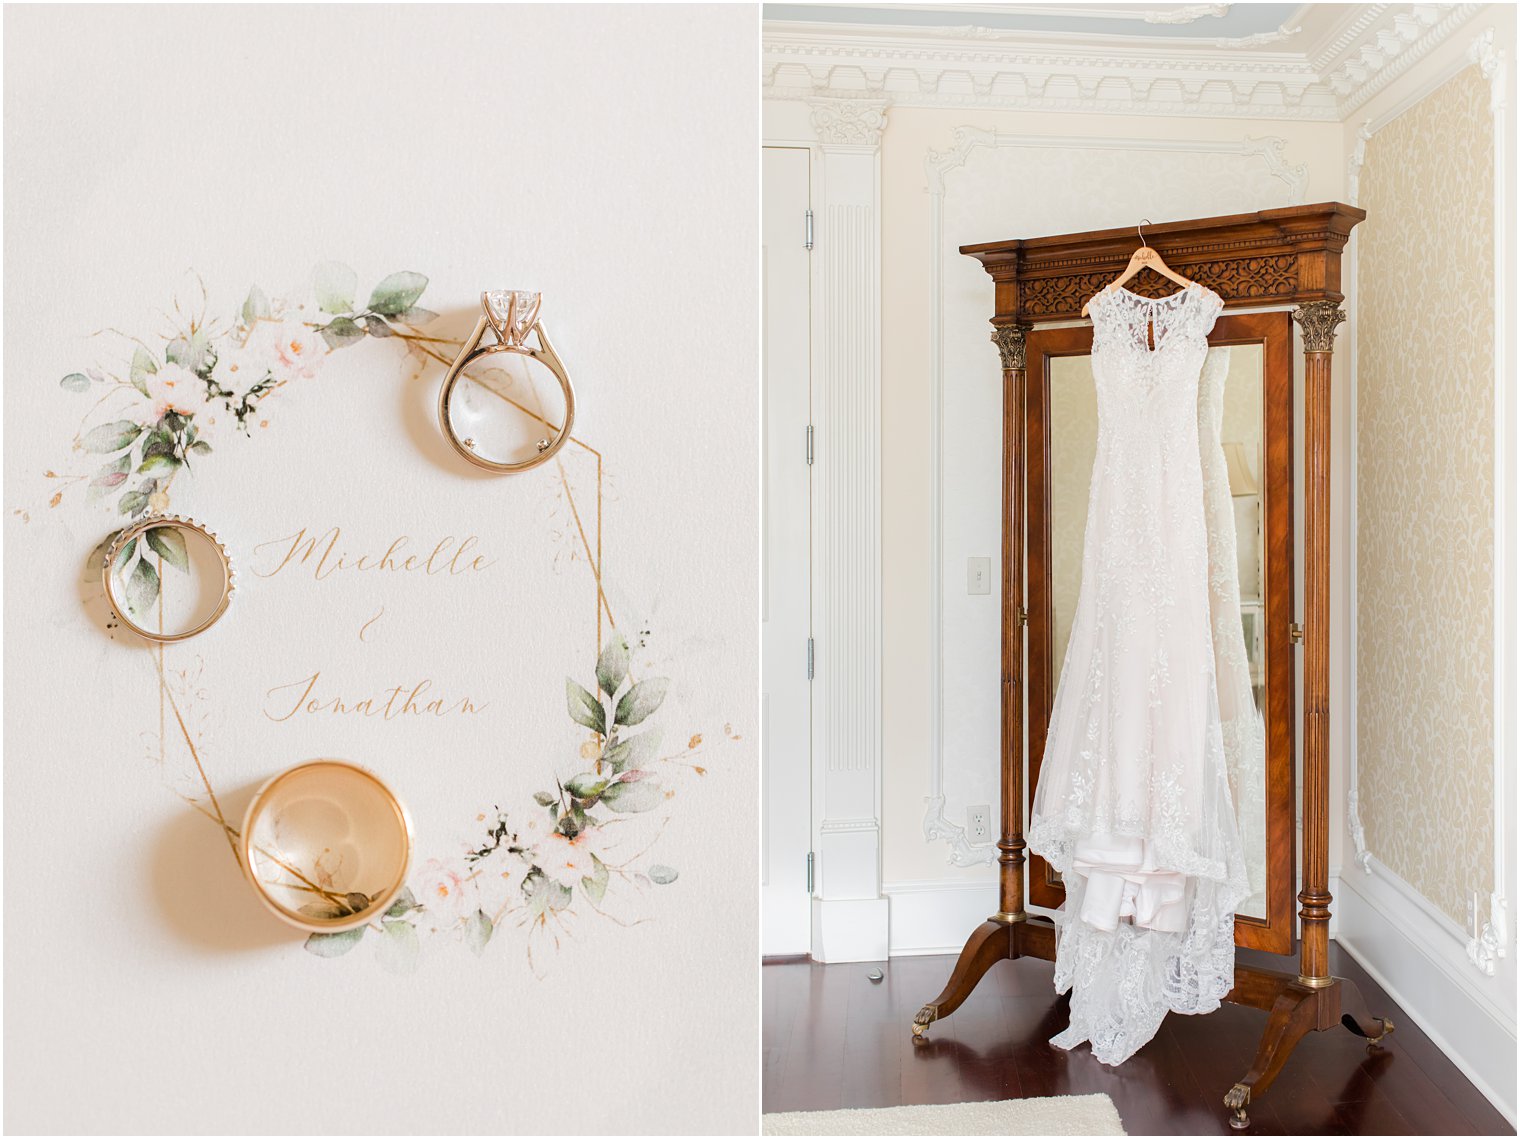 bride's dress hangs on mirror and invitation with gold wedding rings